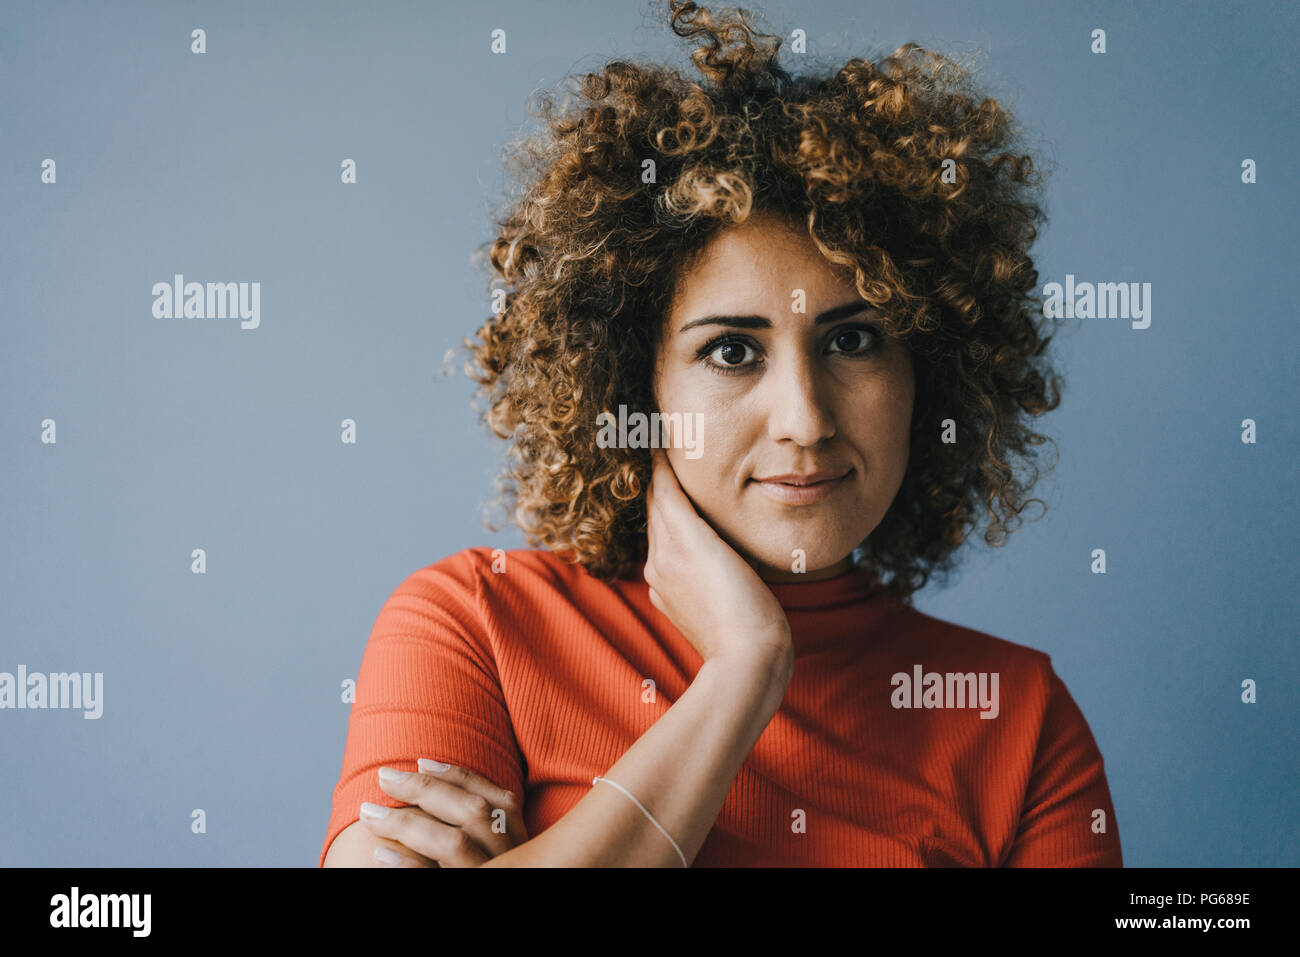 Portrait of a smiling woman with hand on chin Banque D'Images